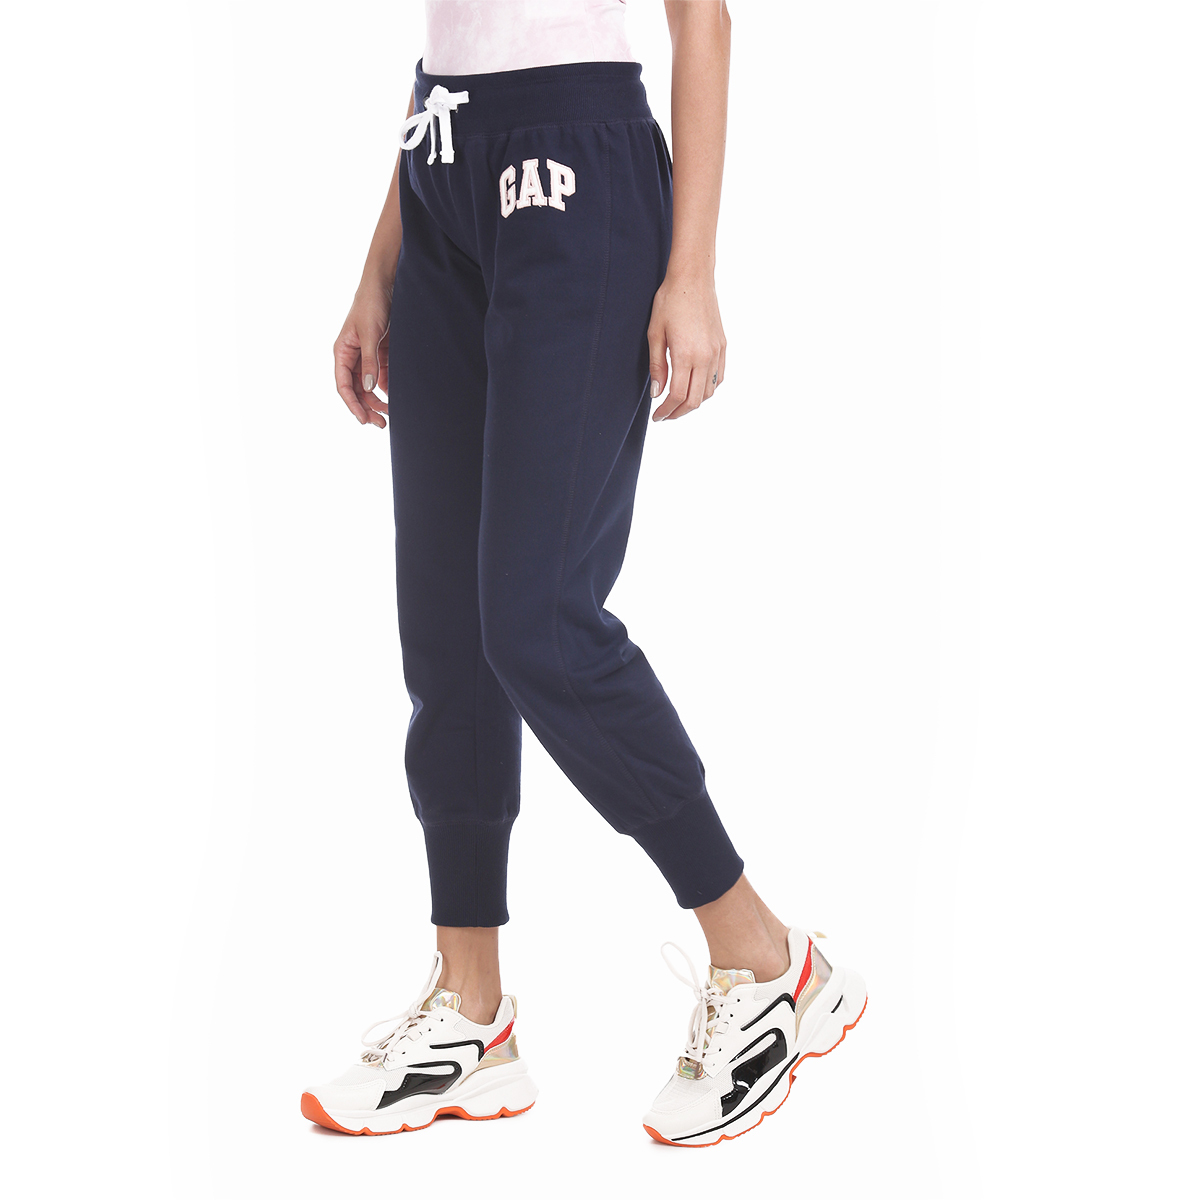 Gap Mid Rise Regular Fit Soft Cozy Fleece Knitted Solid Color Jogger Styled with Applique Worked Logo - Navy